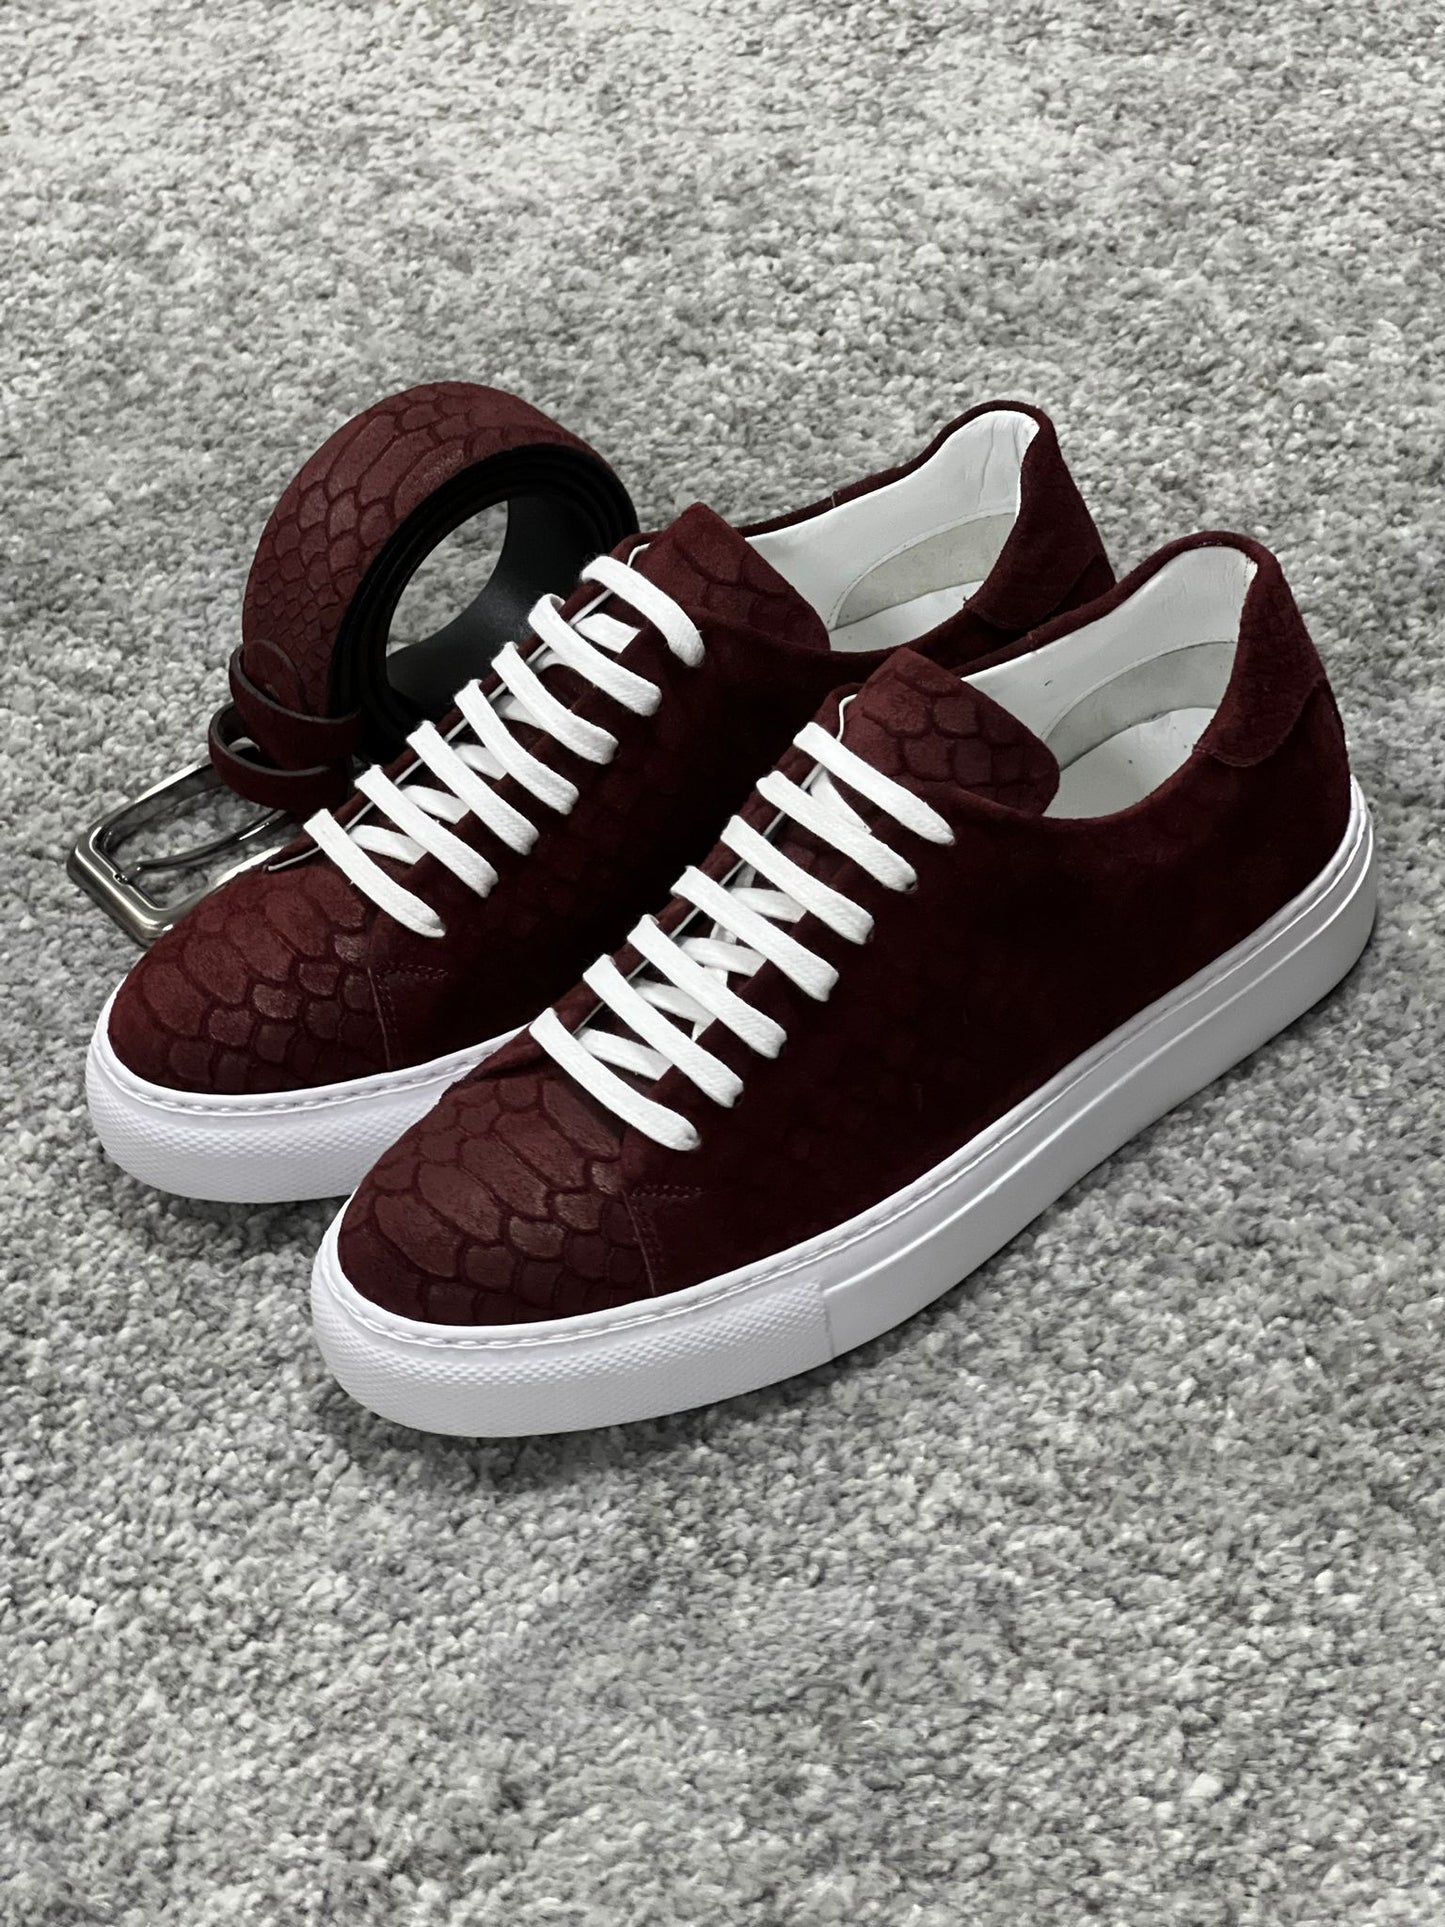 Lenzi Special Edition Suede Print Leather Burgundy Sneakers